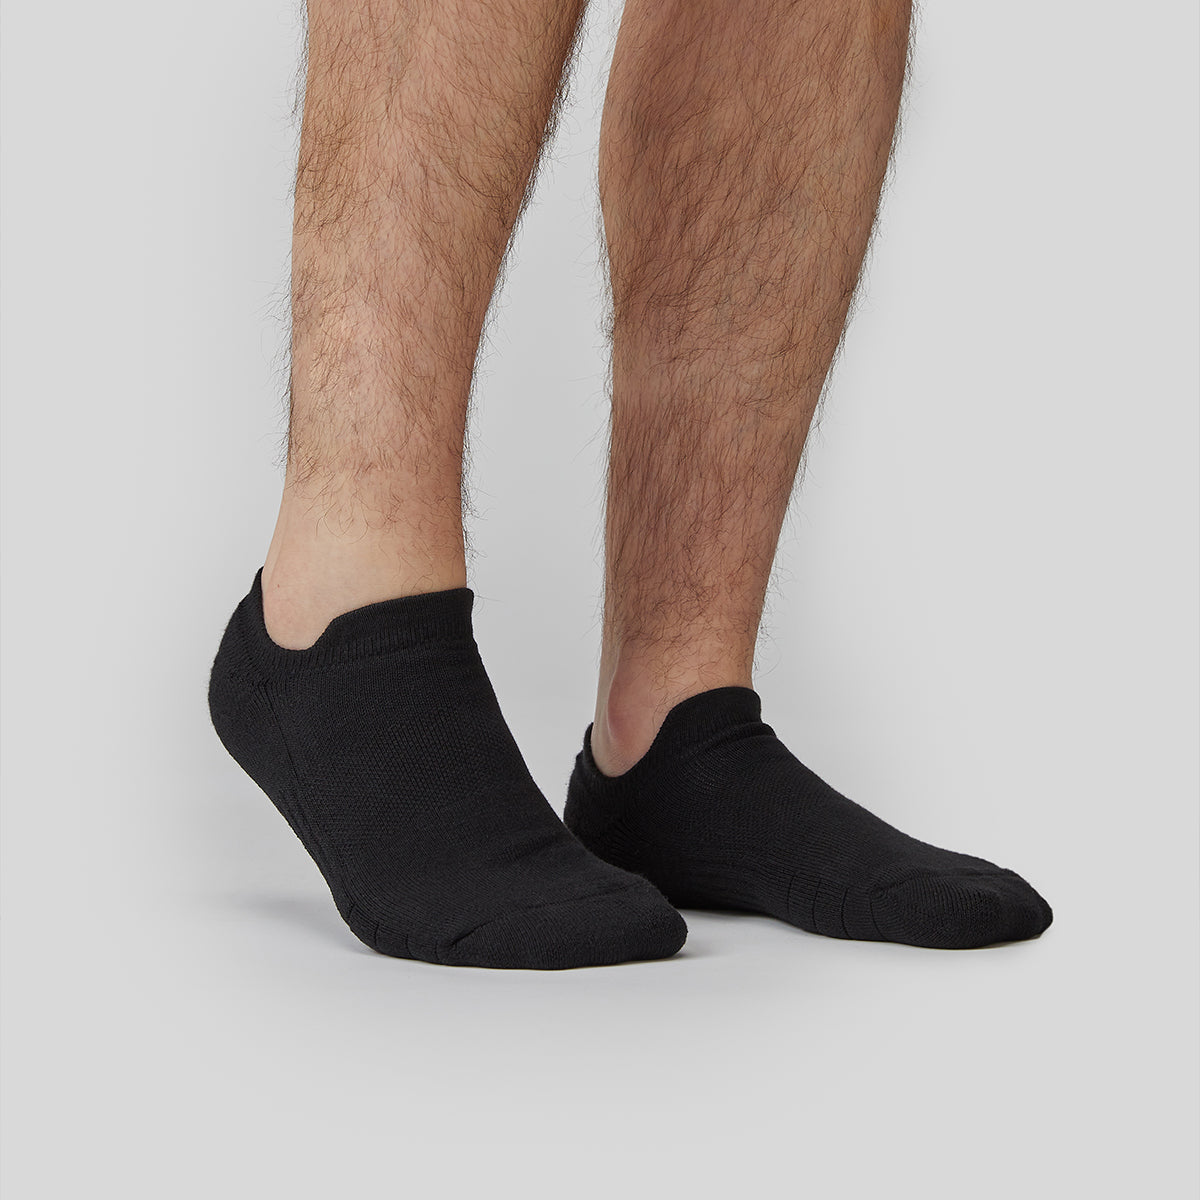 Model standing with the manmade black low cut socks